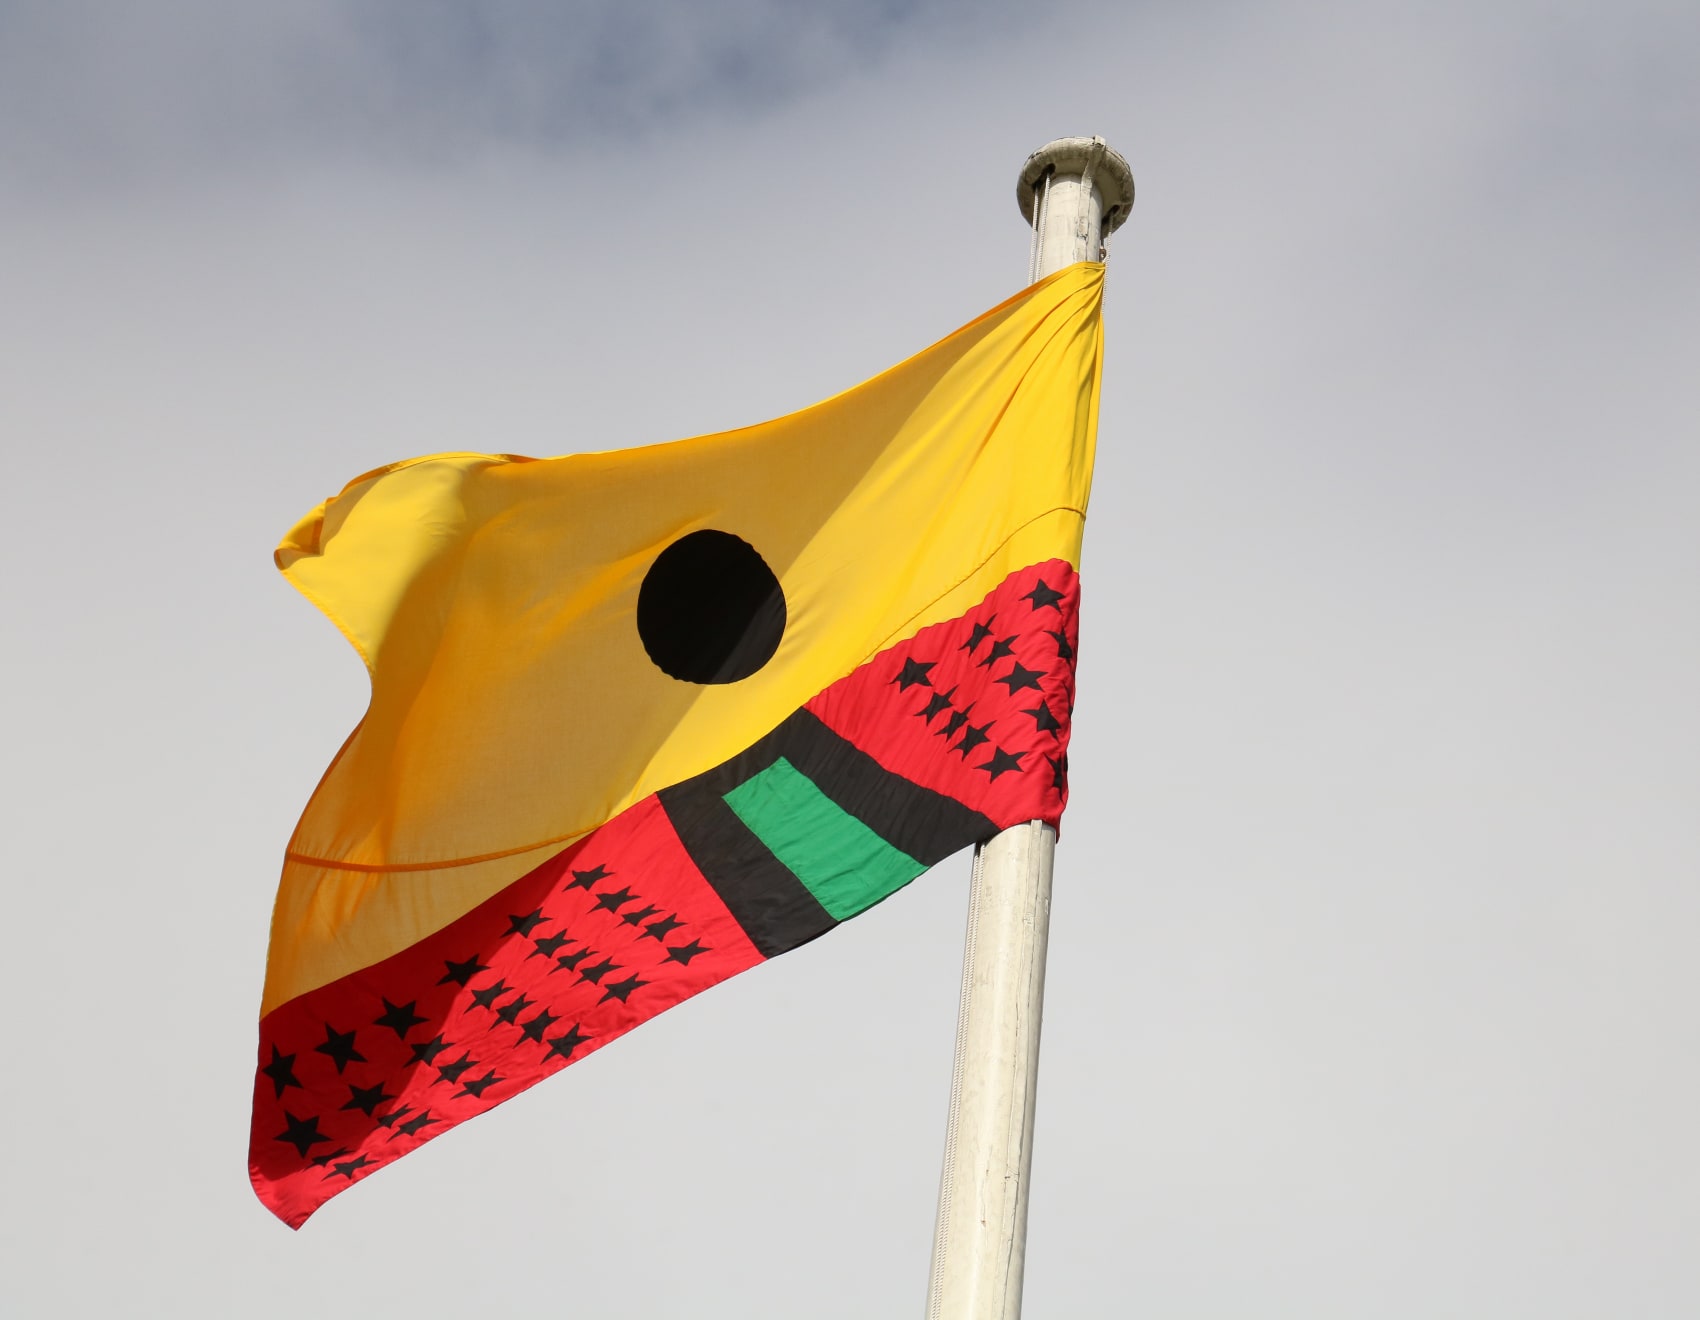 Larry Achiampong, PAN AFRICAN FLAG FOR THE RELIC TRAVELLERS’ ALLIANCE, 2017